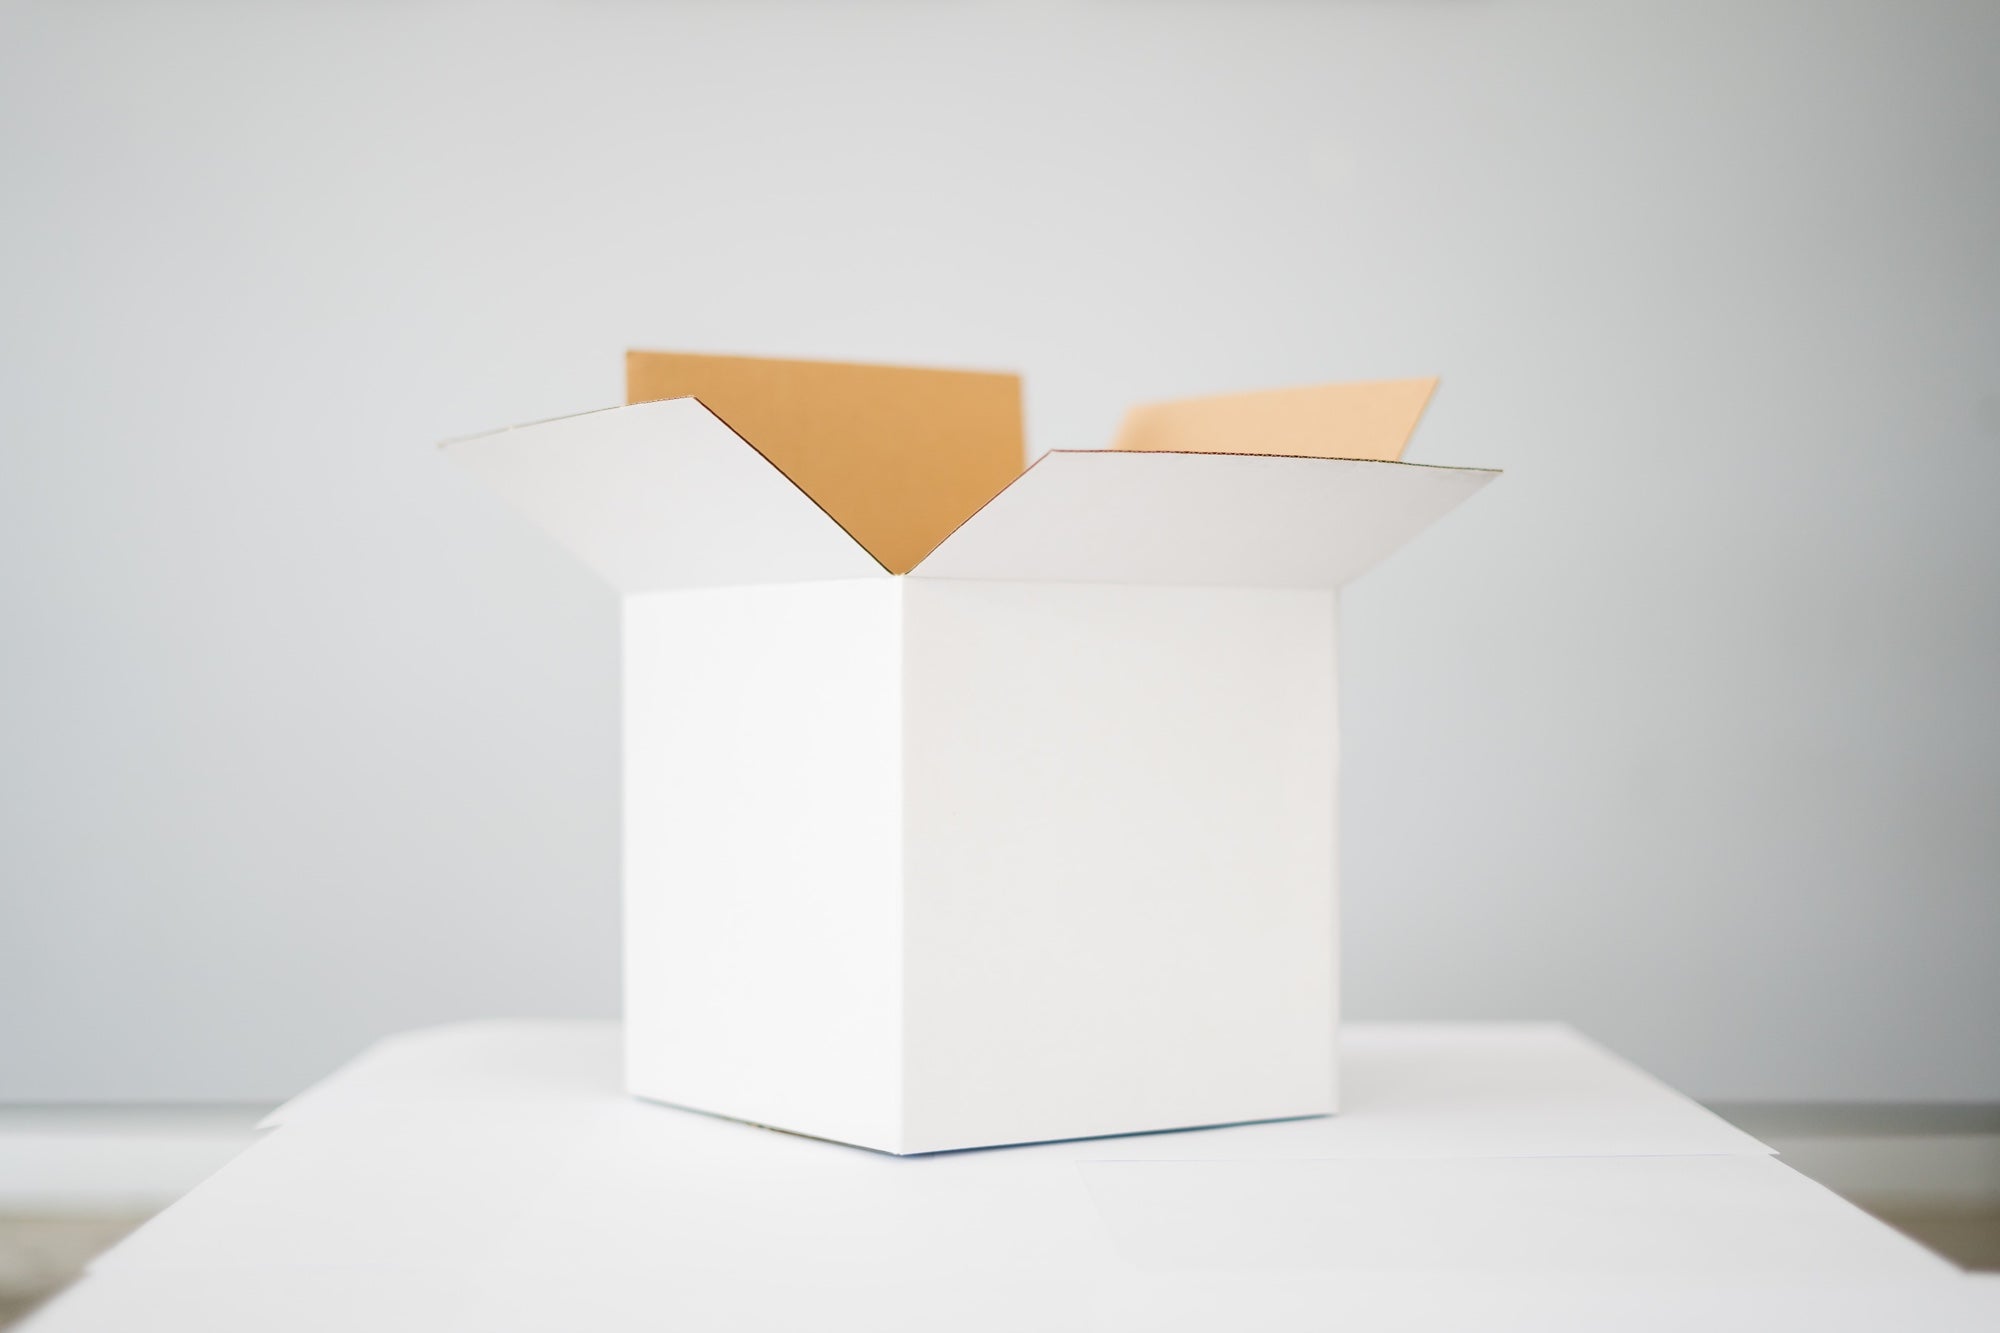 A plain white cardboard box sits open on the table